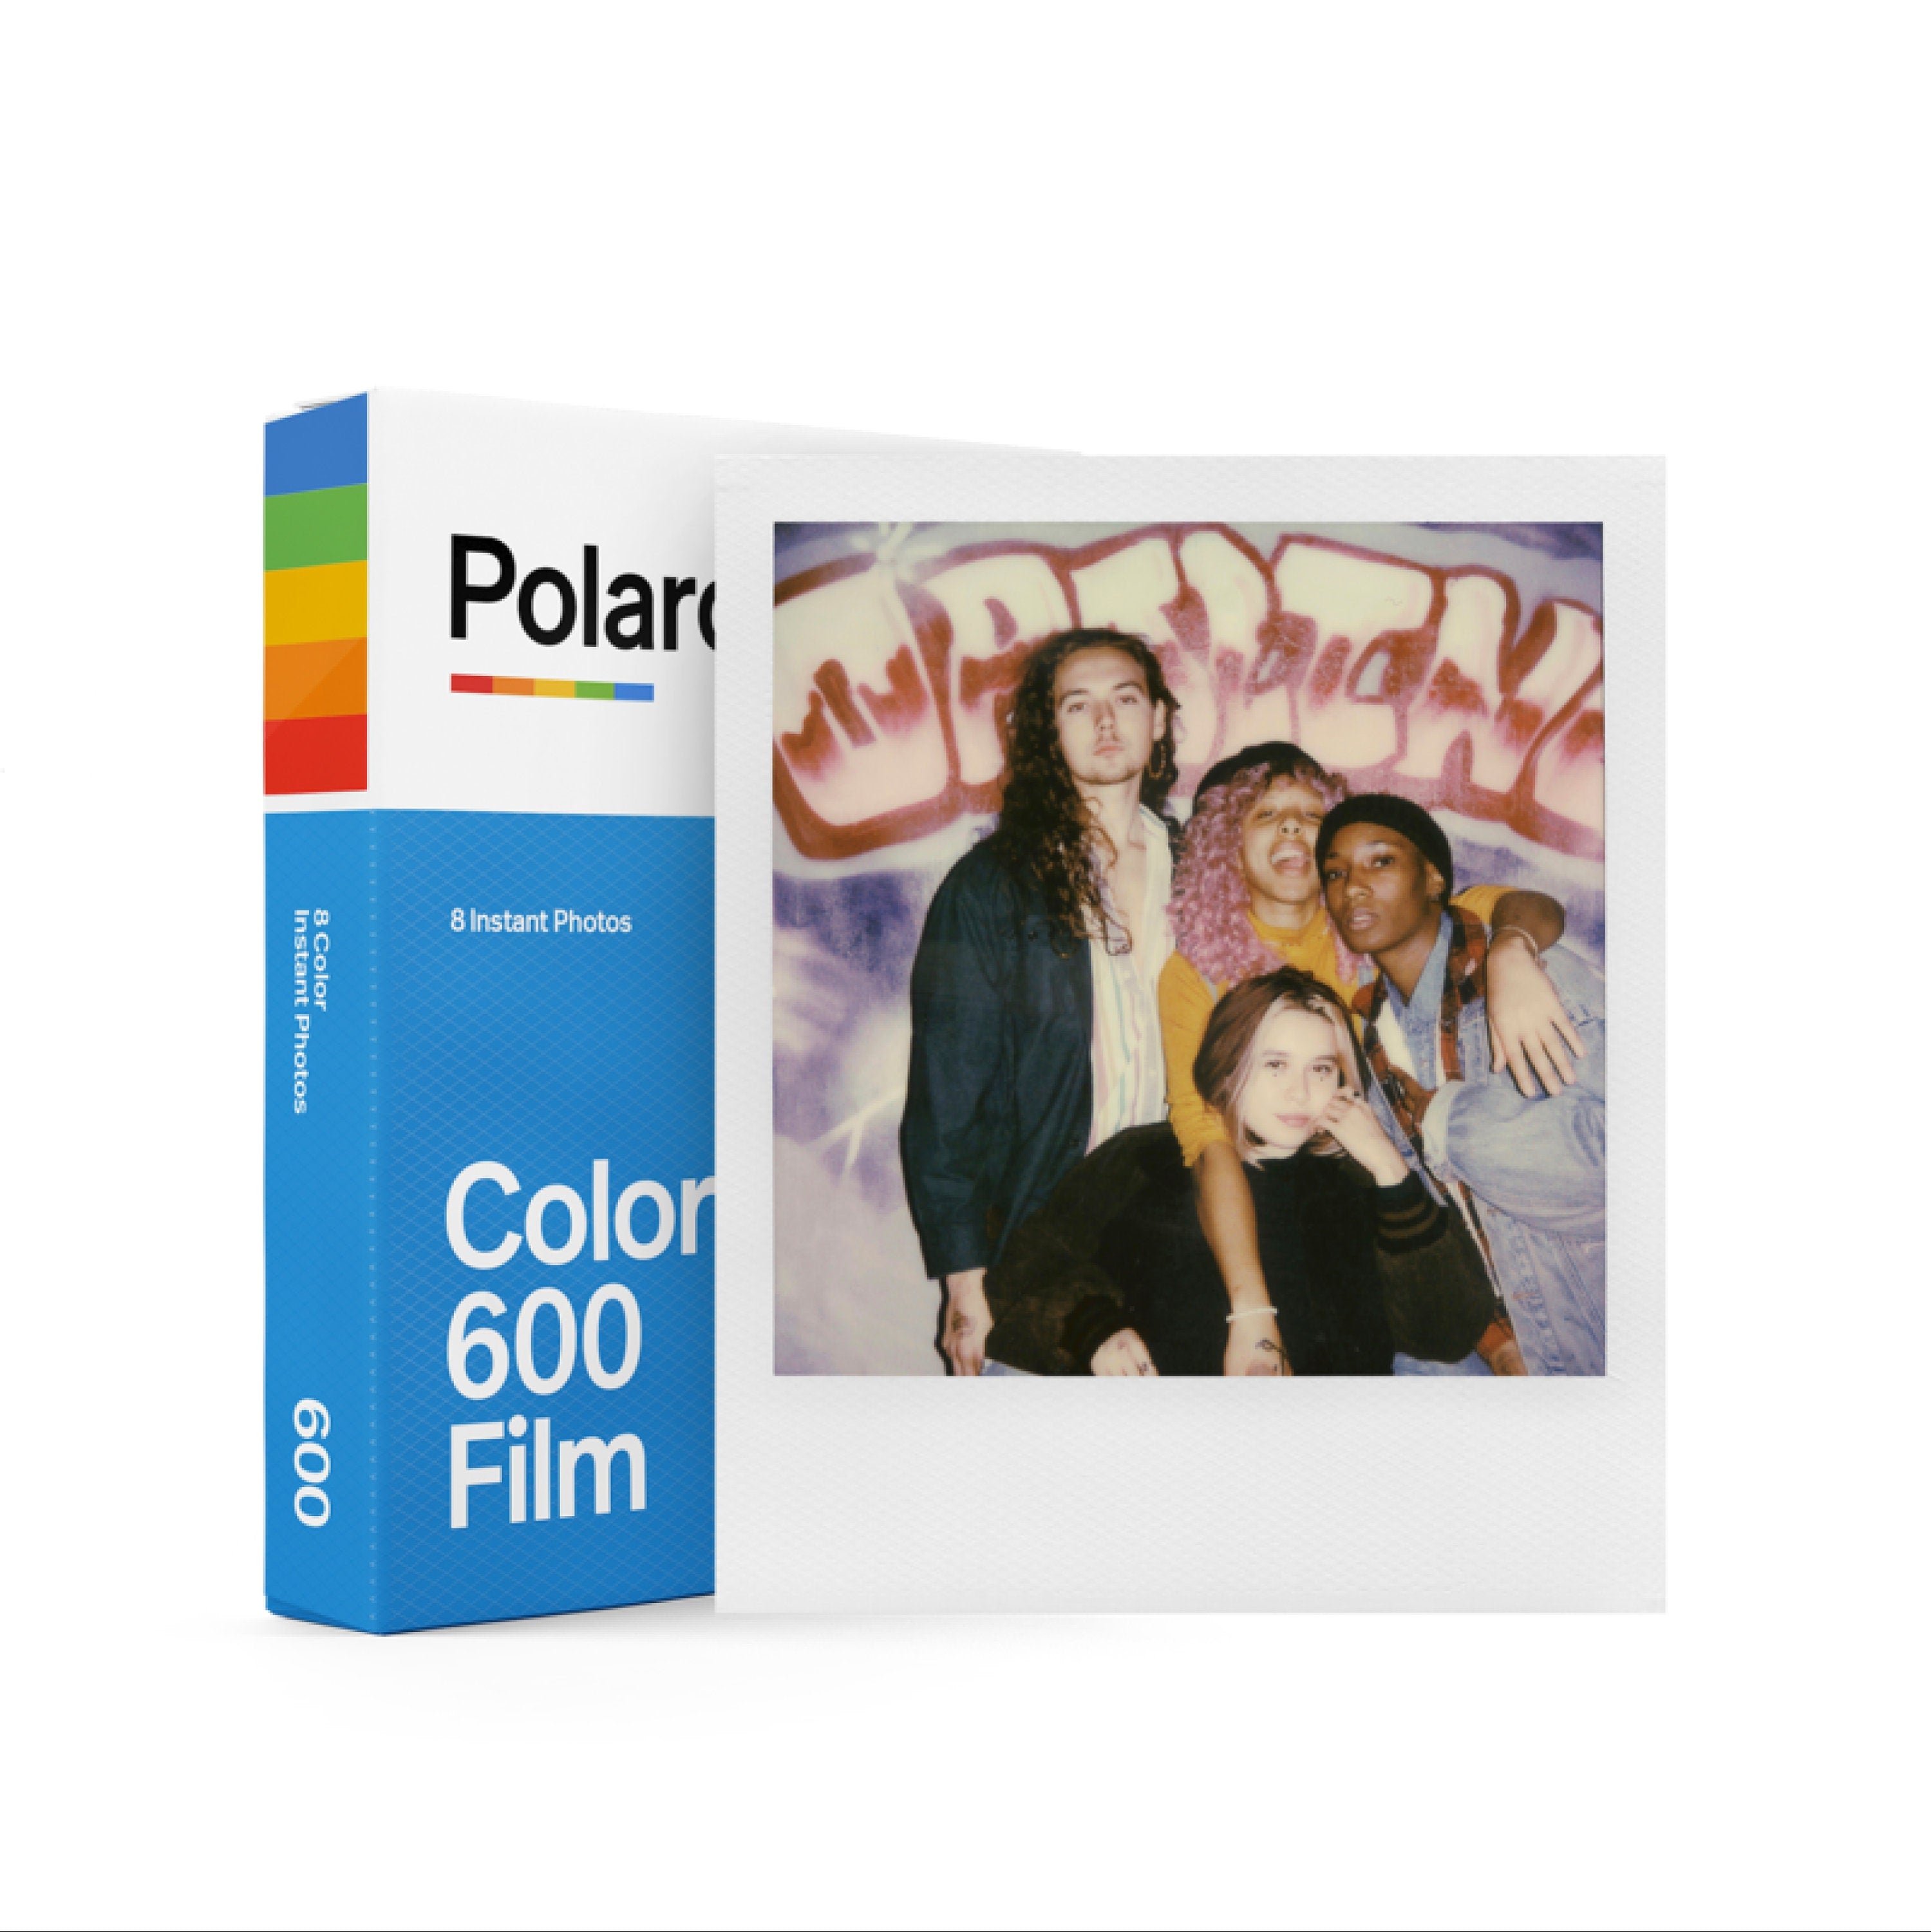 Polaroid Color 600 Film Round Frame Edition (2021) Review